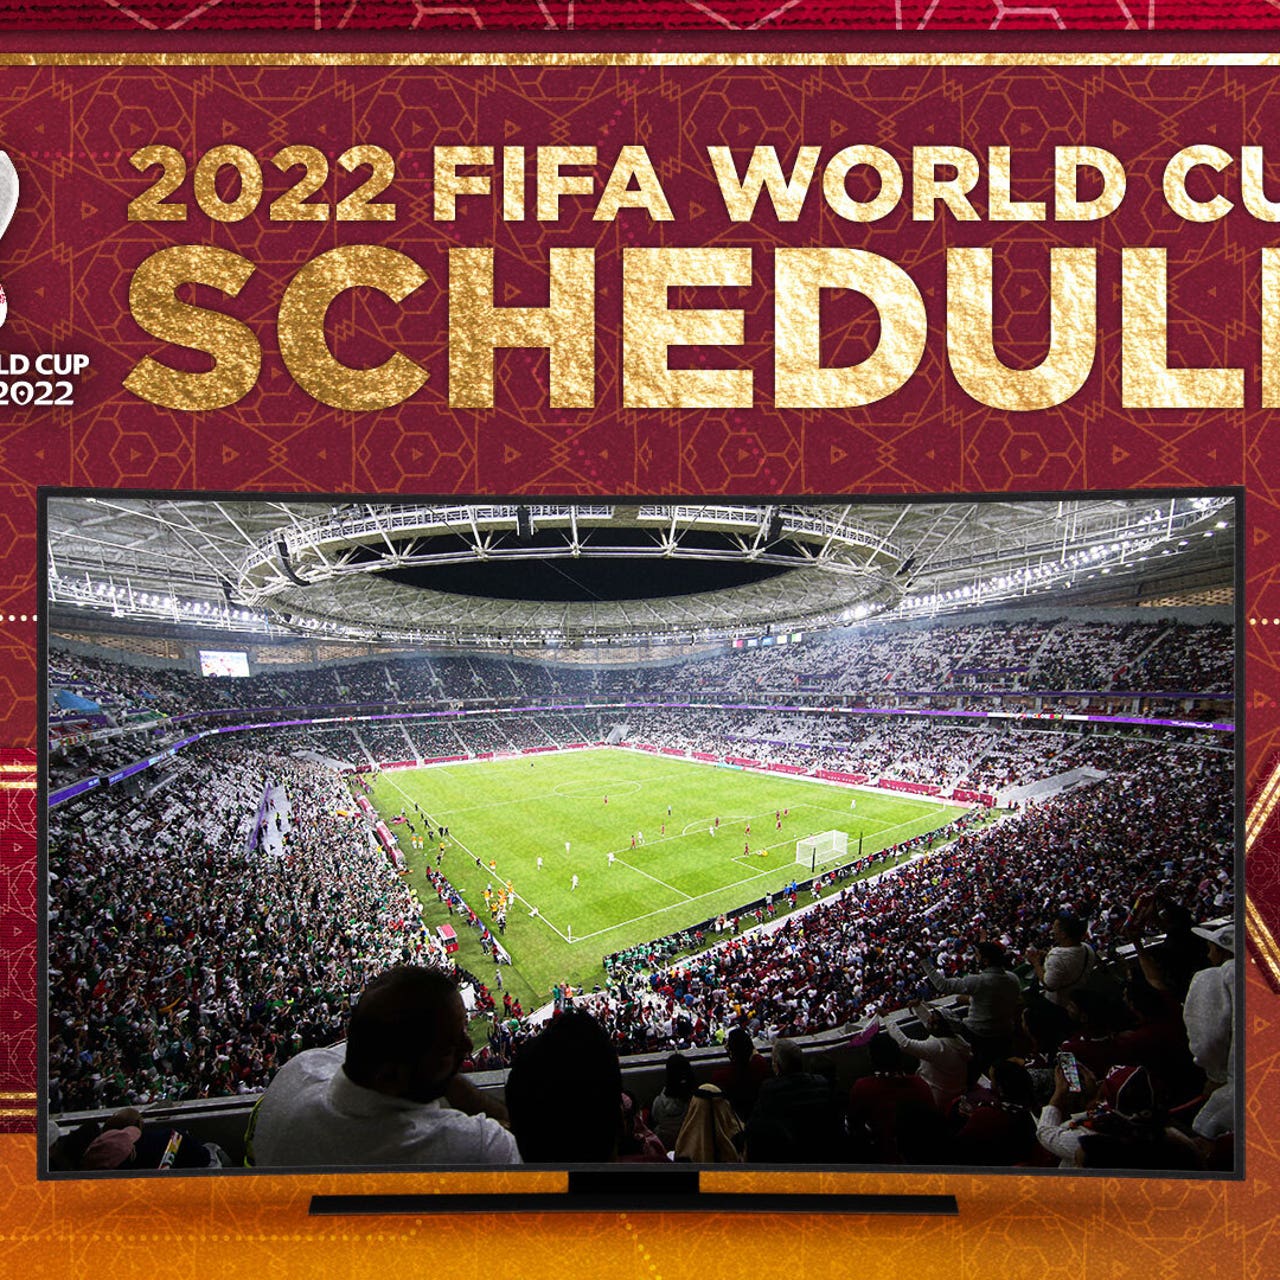 How to watch the 2022 World Cup on FOX Times, channels, full match schedule FOX Sports